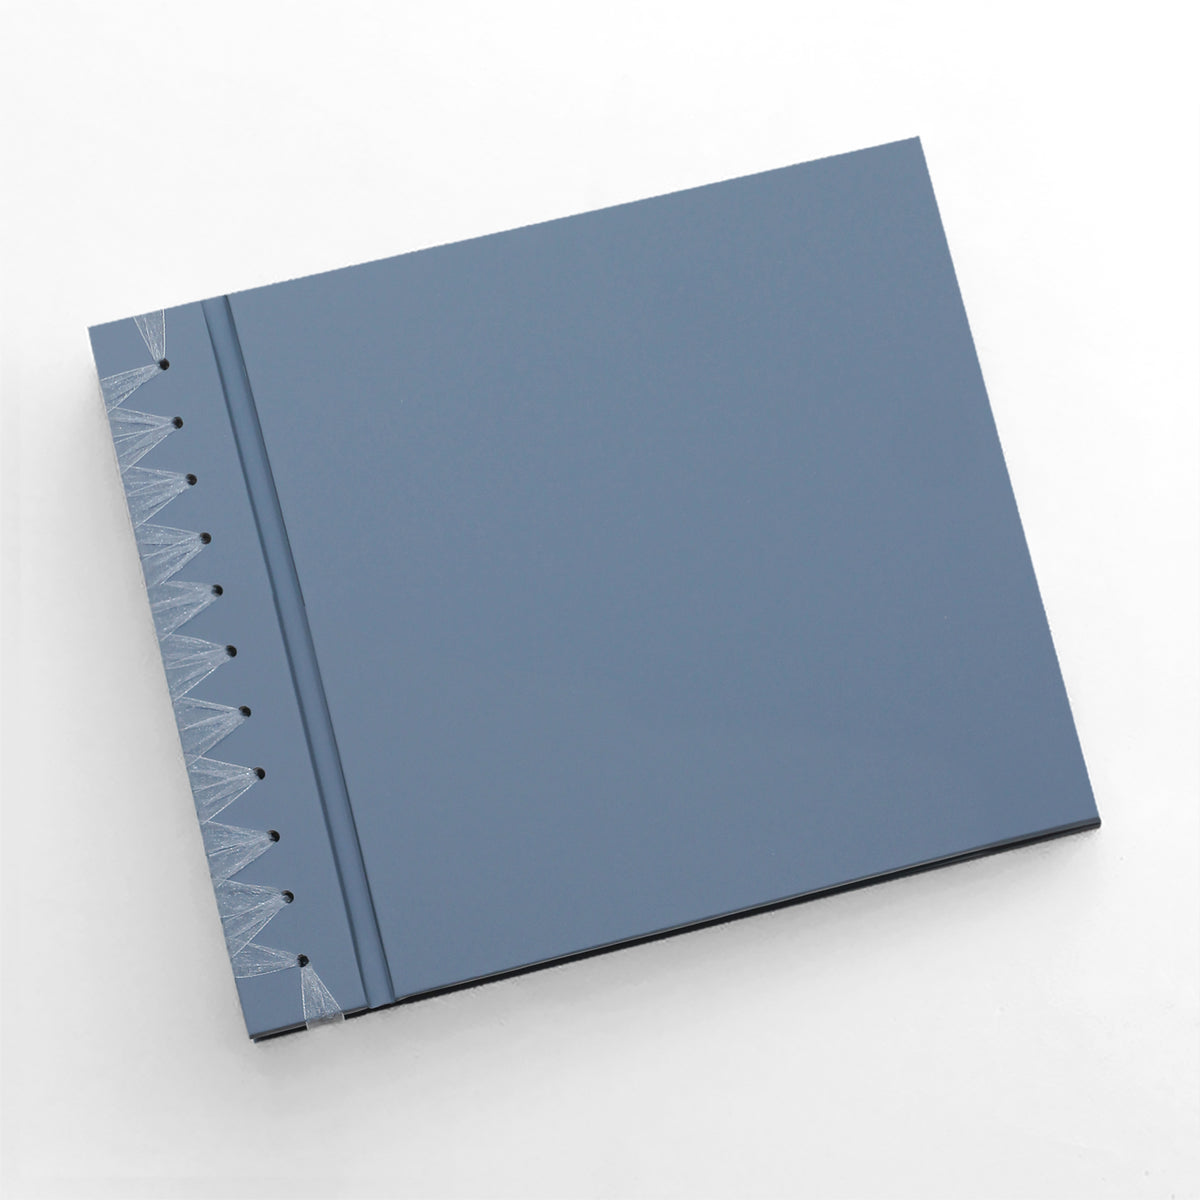 Deluxe 12 x 15 Paper Page Album | Cover: Ocean Blue Vegan Leather | Available Personalized